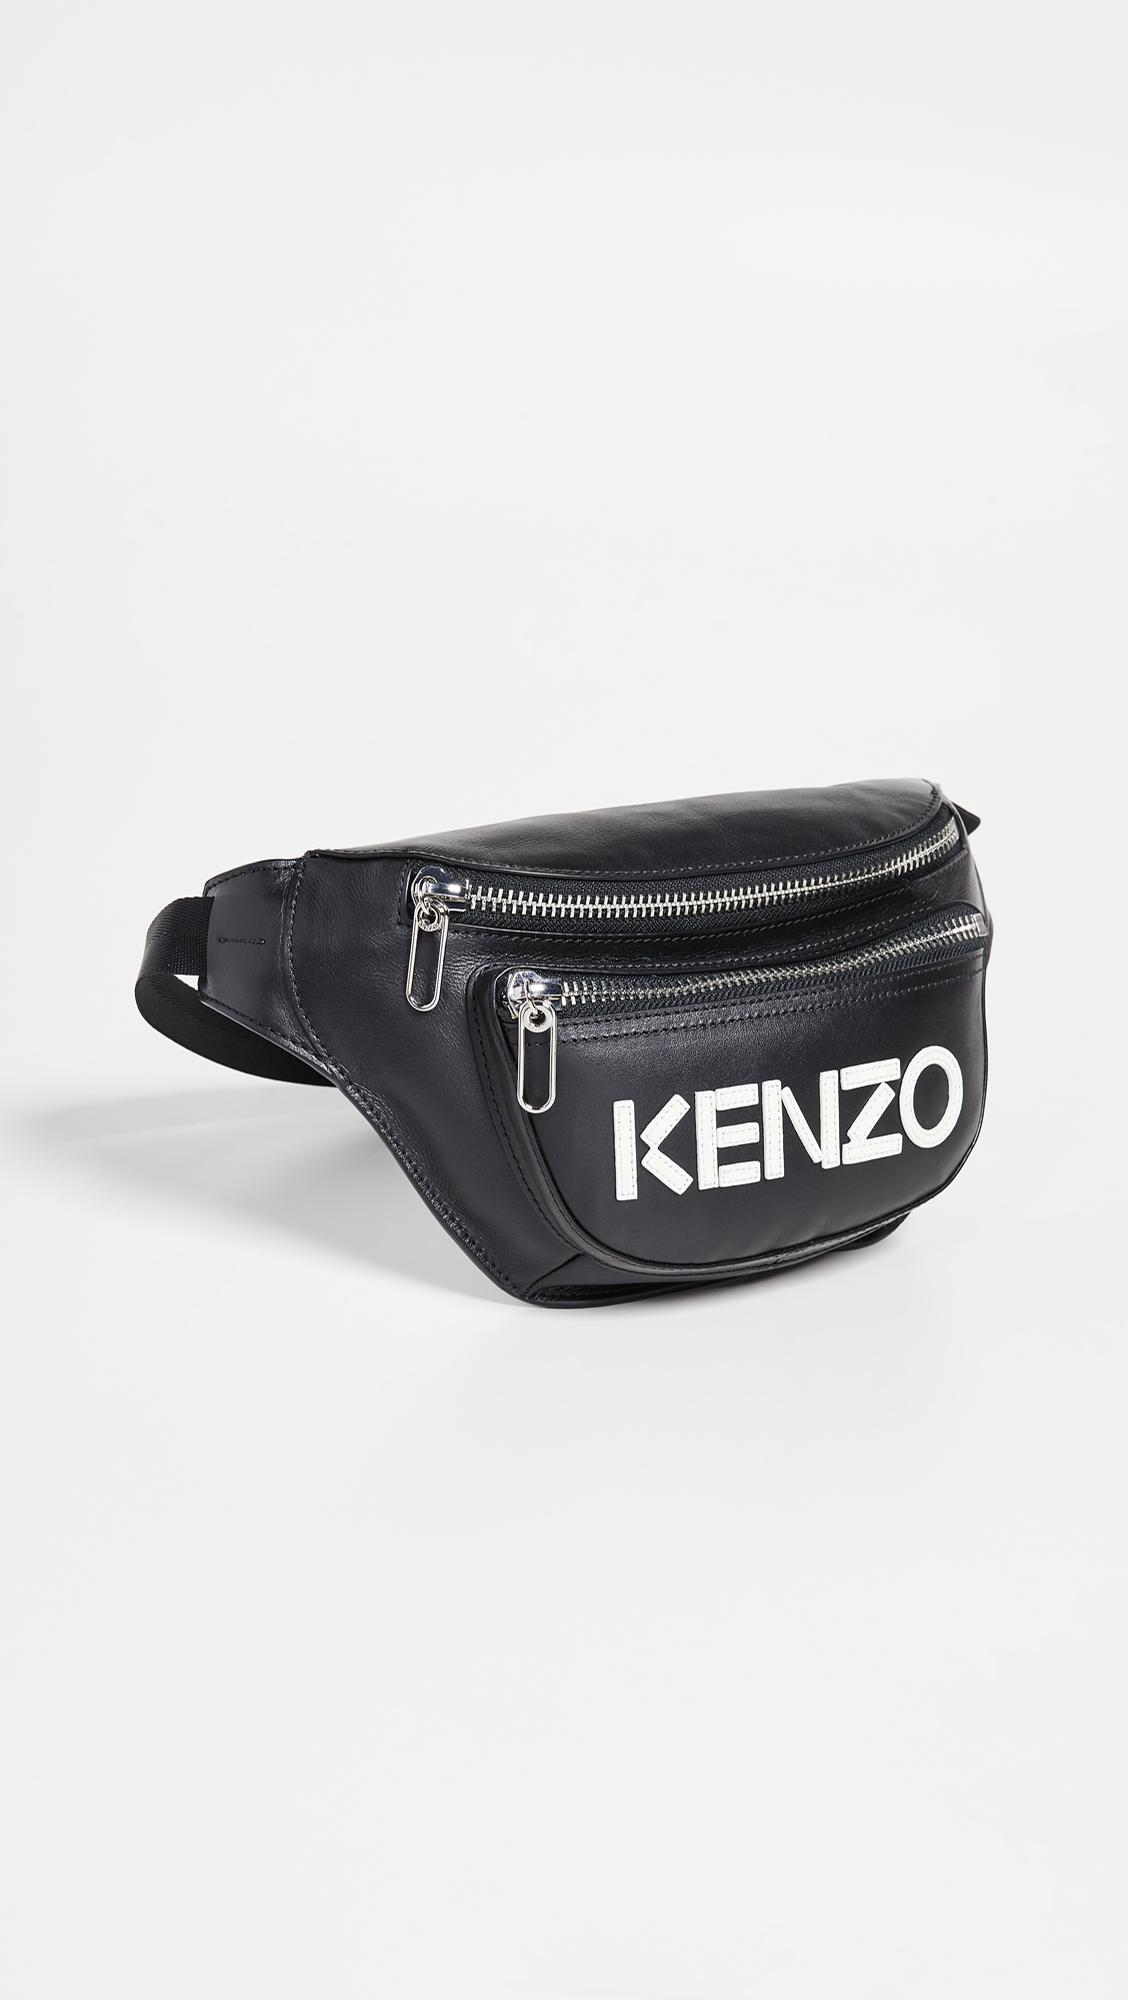 KENZO Leather Bum Bag Fanny Pack in 